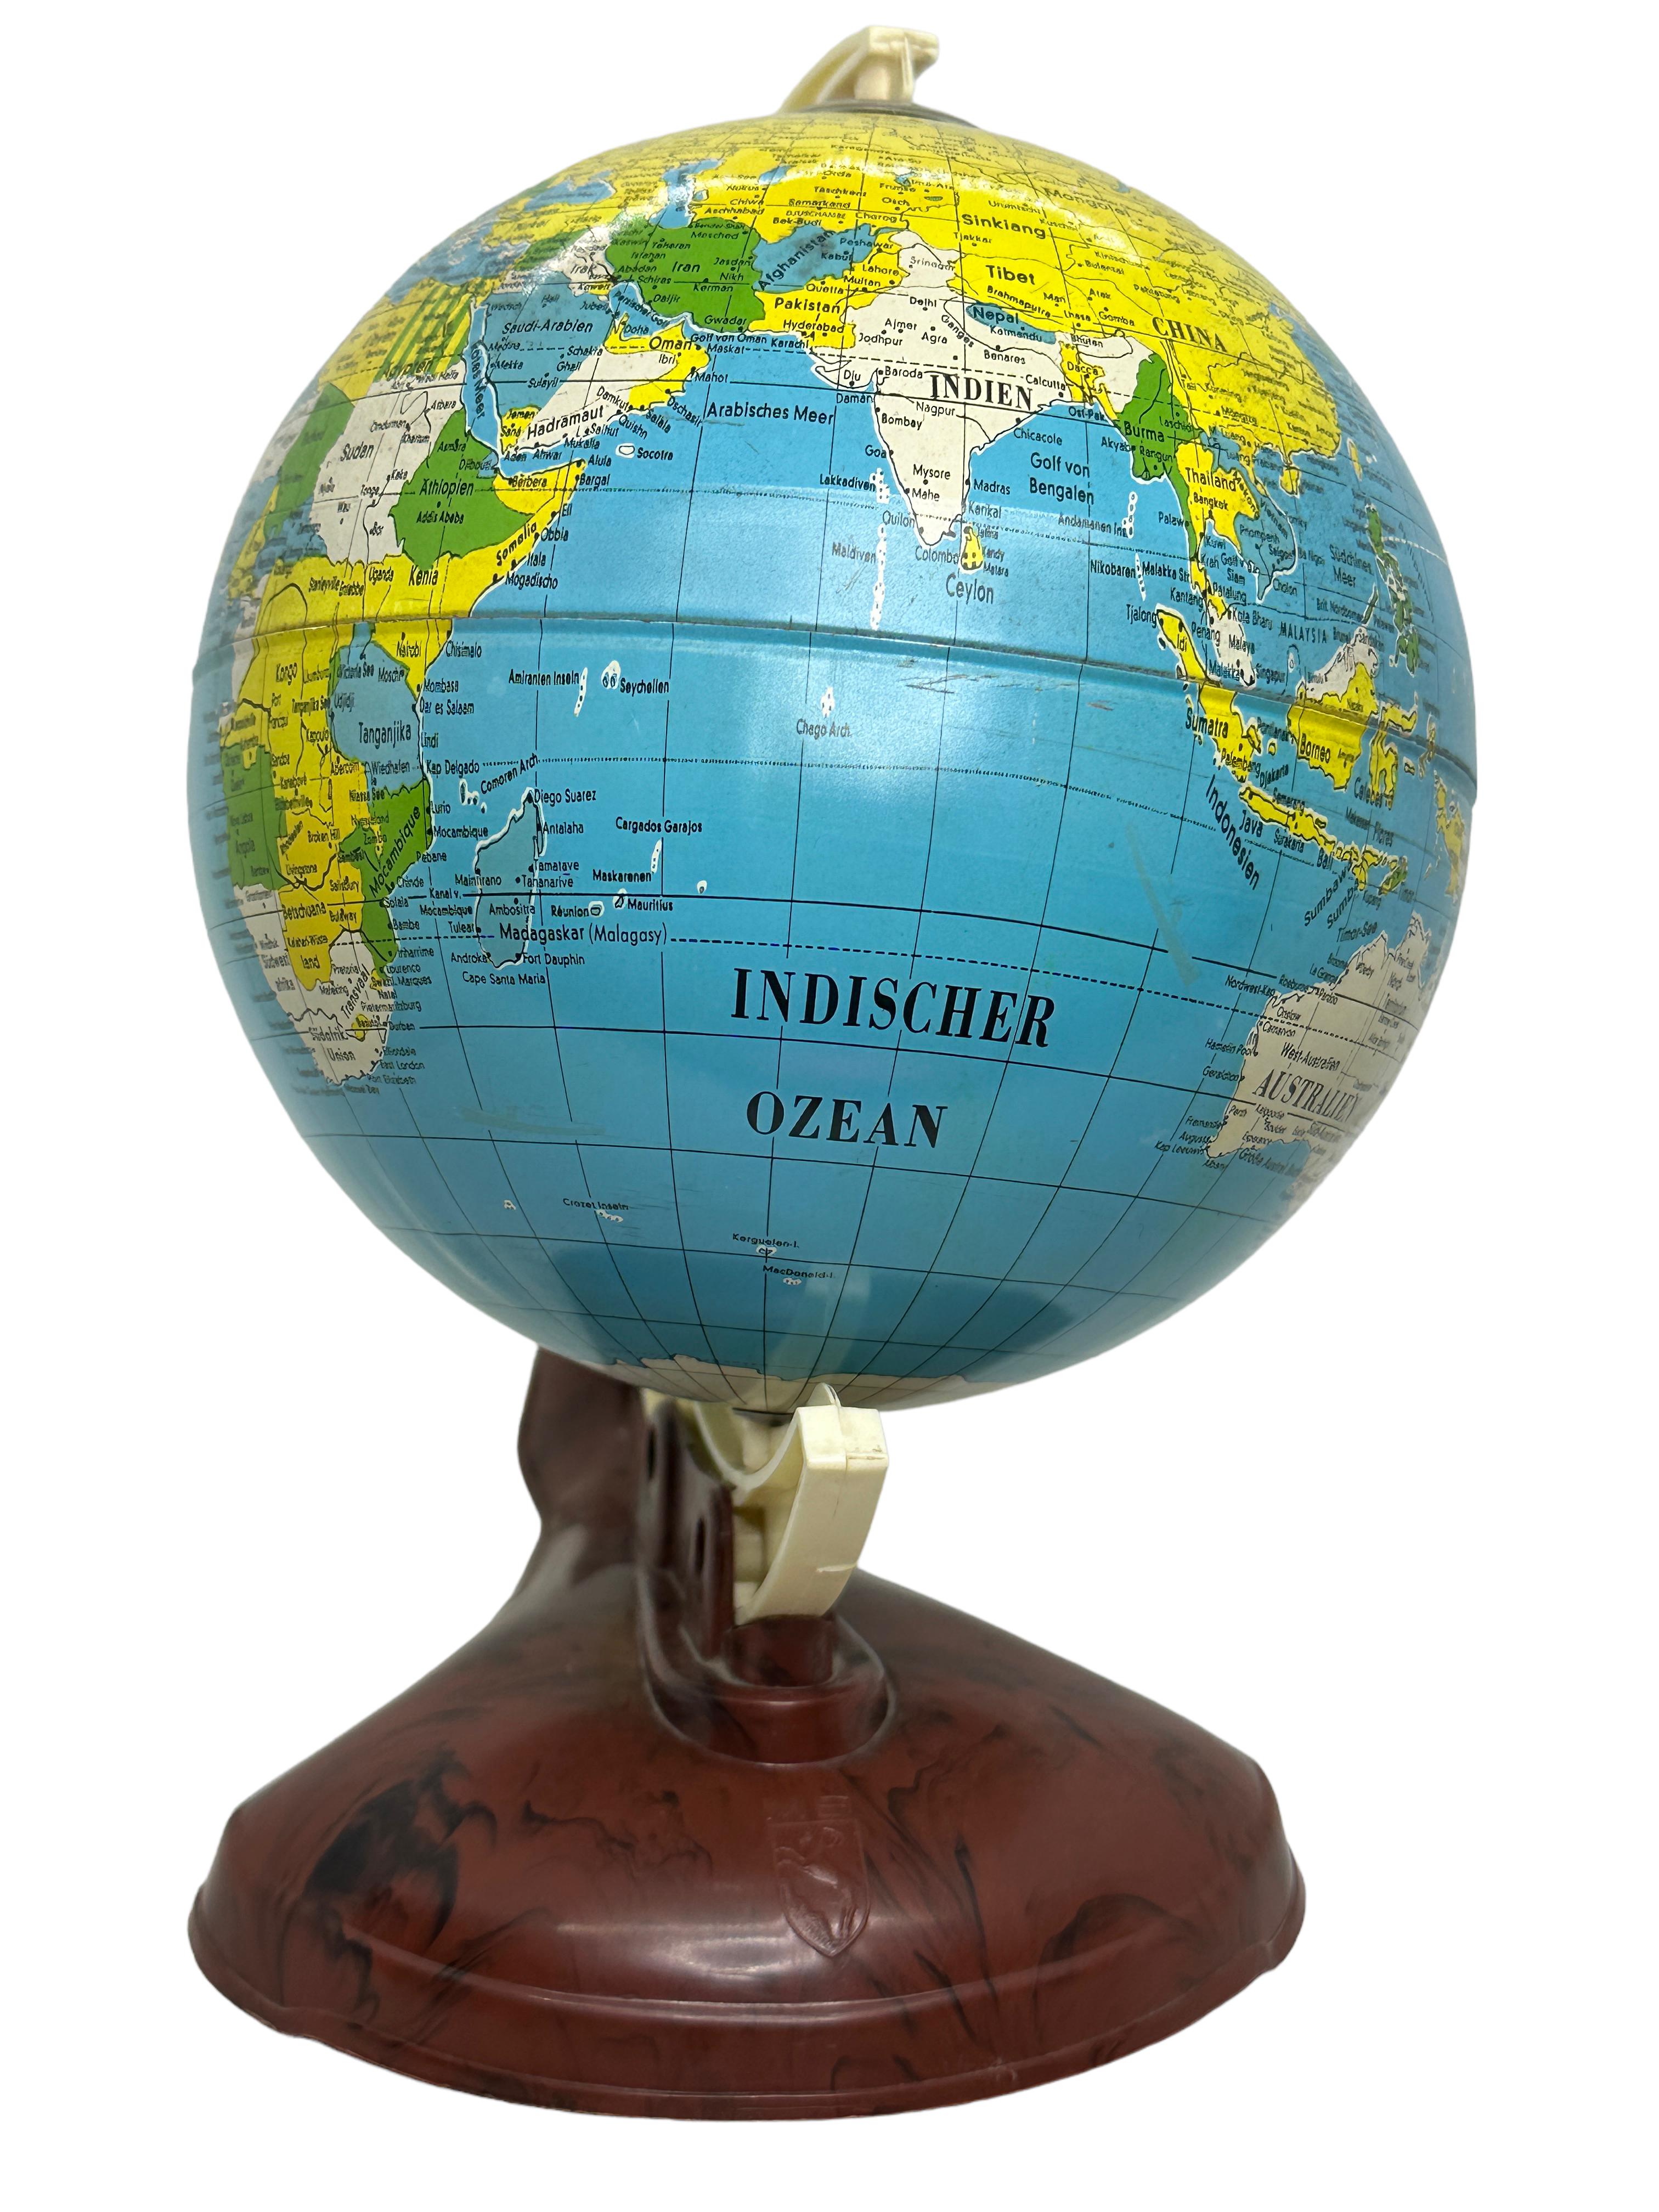 Vintage Globe from the 1950s.
Specially made on the subject of aviation.
Depicted with all kinds of flying lines.
Made by the company M.S. Germany.
The globe is made of Tin and the stand is Bakelite.
Globe and stand are in beautiful vintage